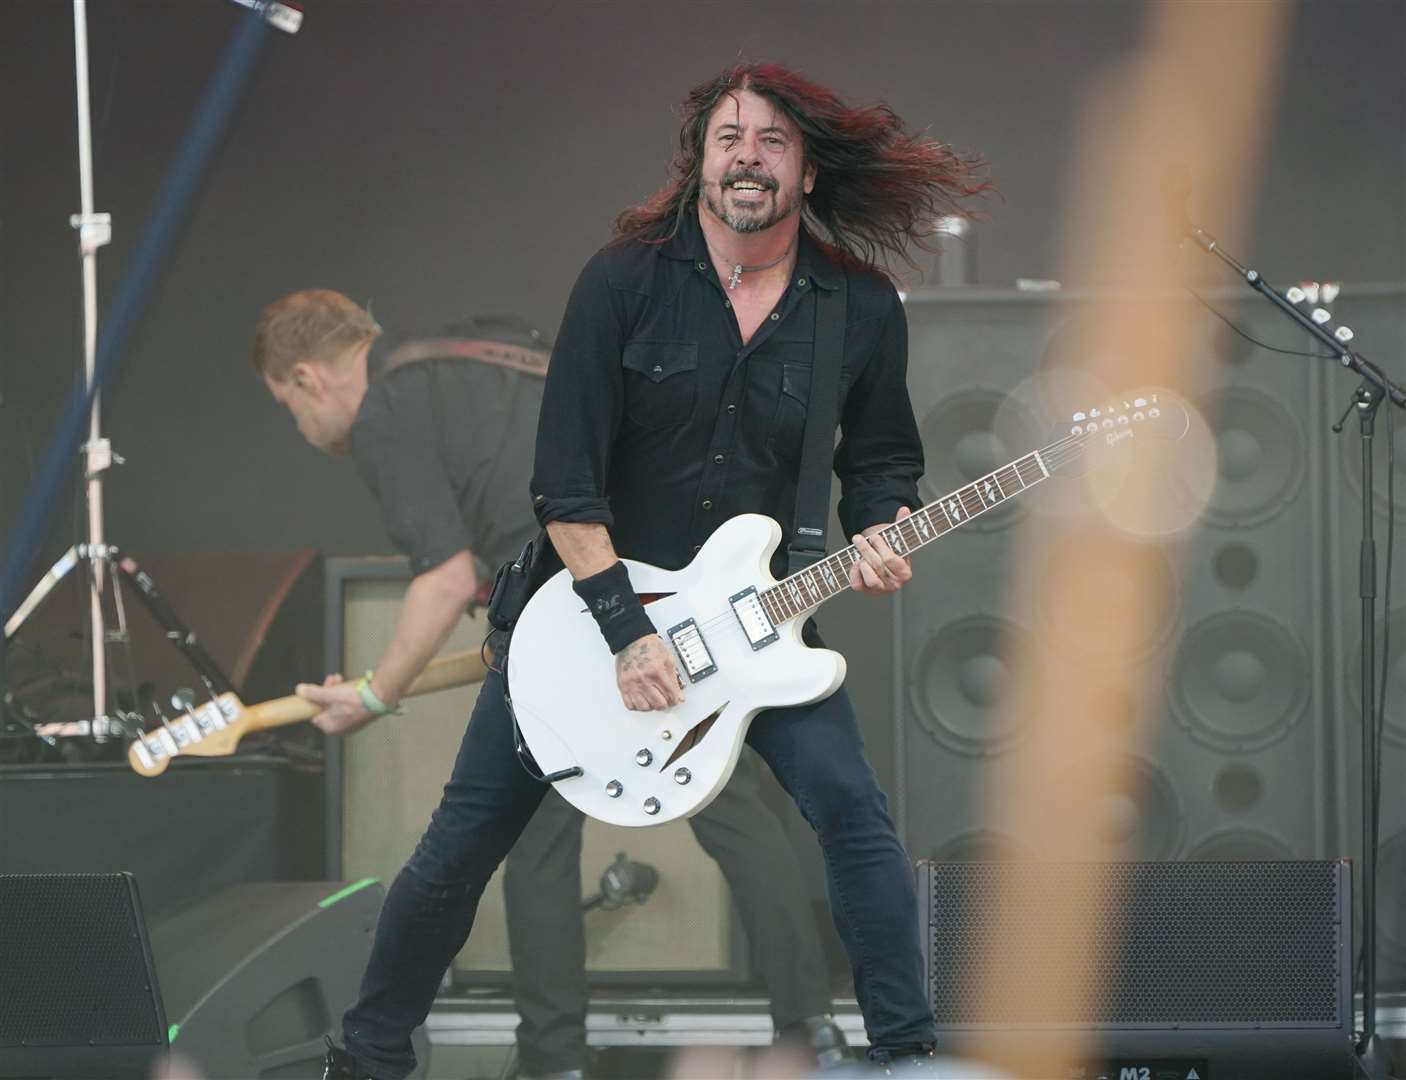 The Foo Fighters, performing under the name The ChurnUps, on the Pyramid stage at the Glastonbury Festival (Yui Mok/PA)